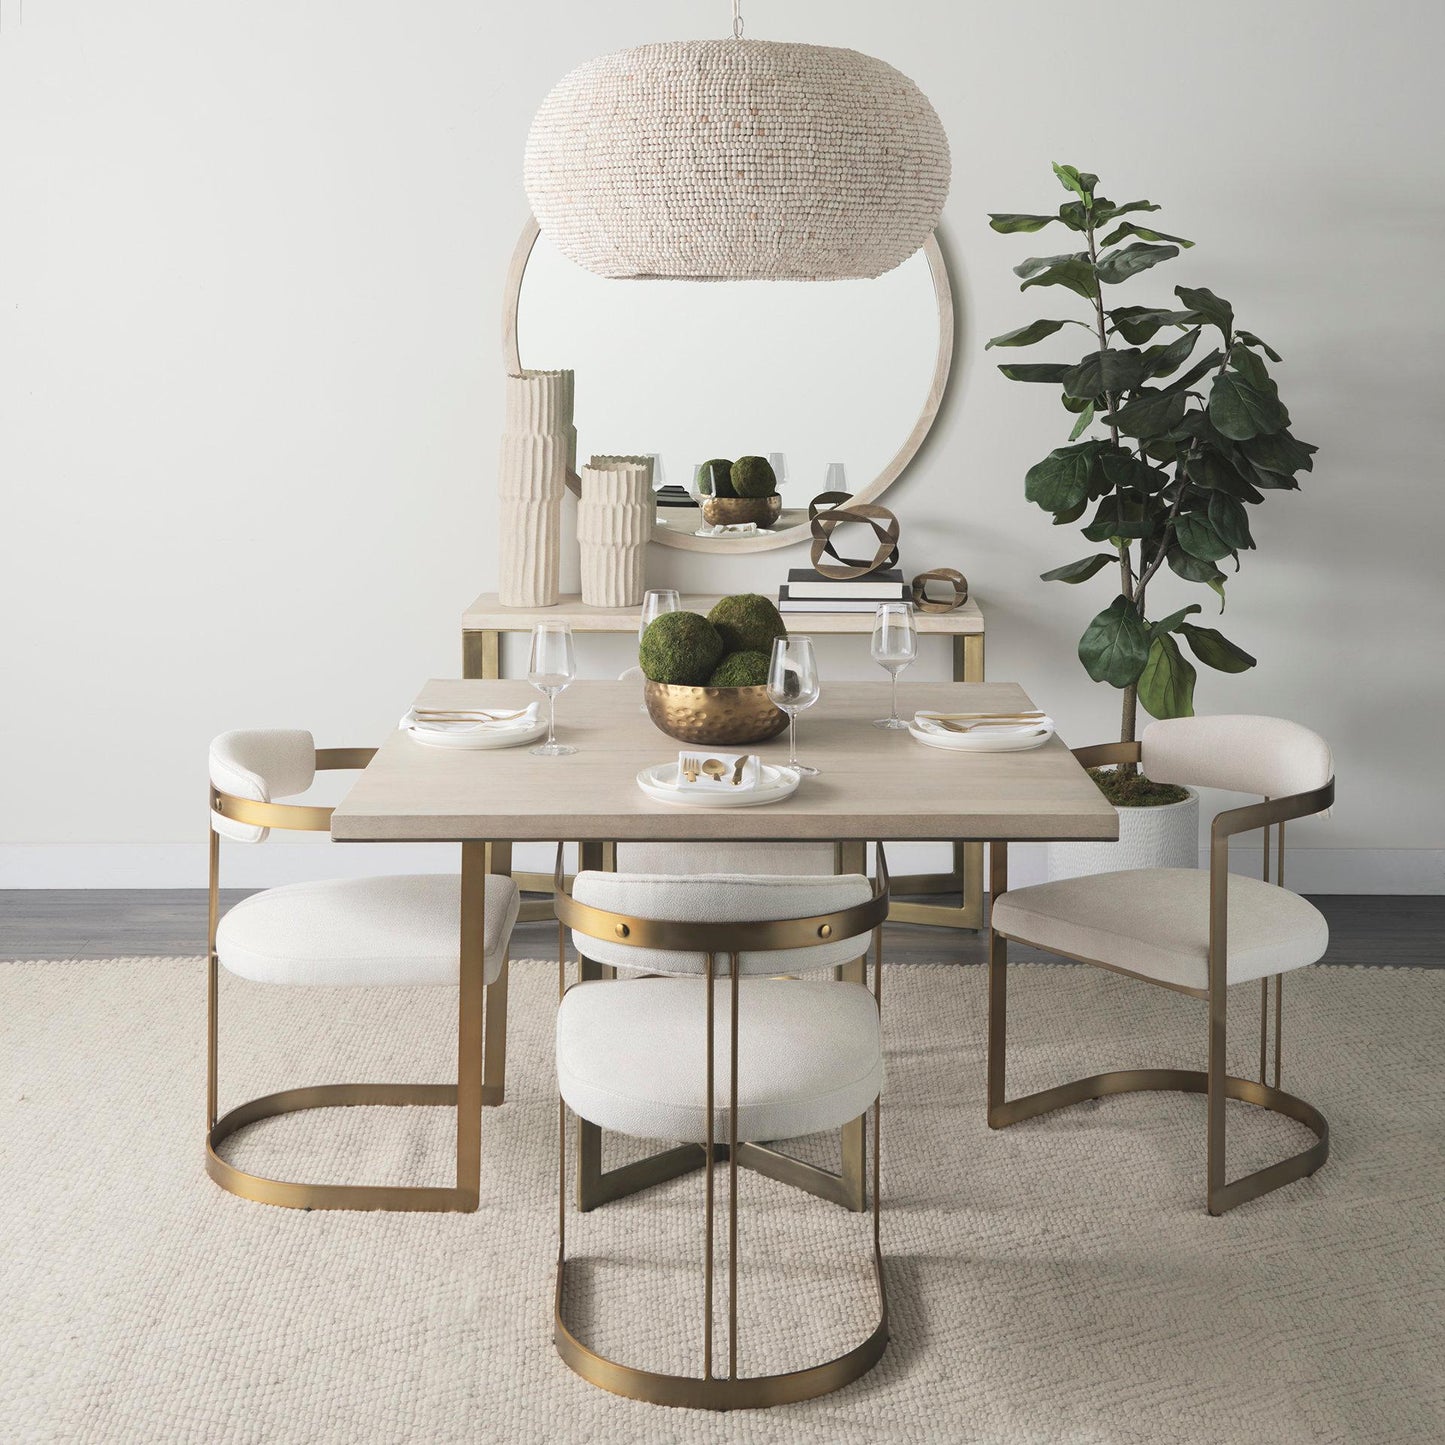 Faye I 48L x 48W x 30H Barely Gray Finished Wood W/Gold Metal Base Square Dining Table